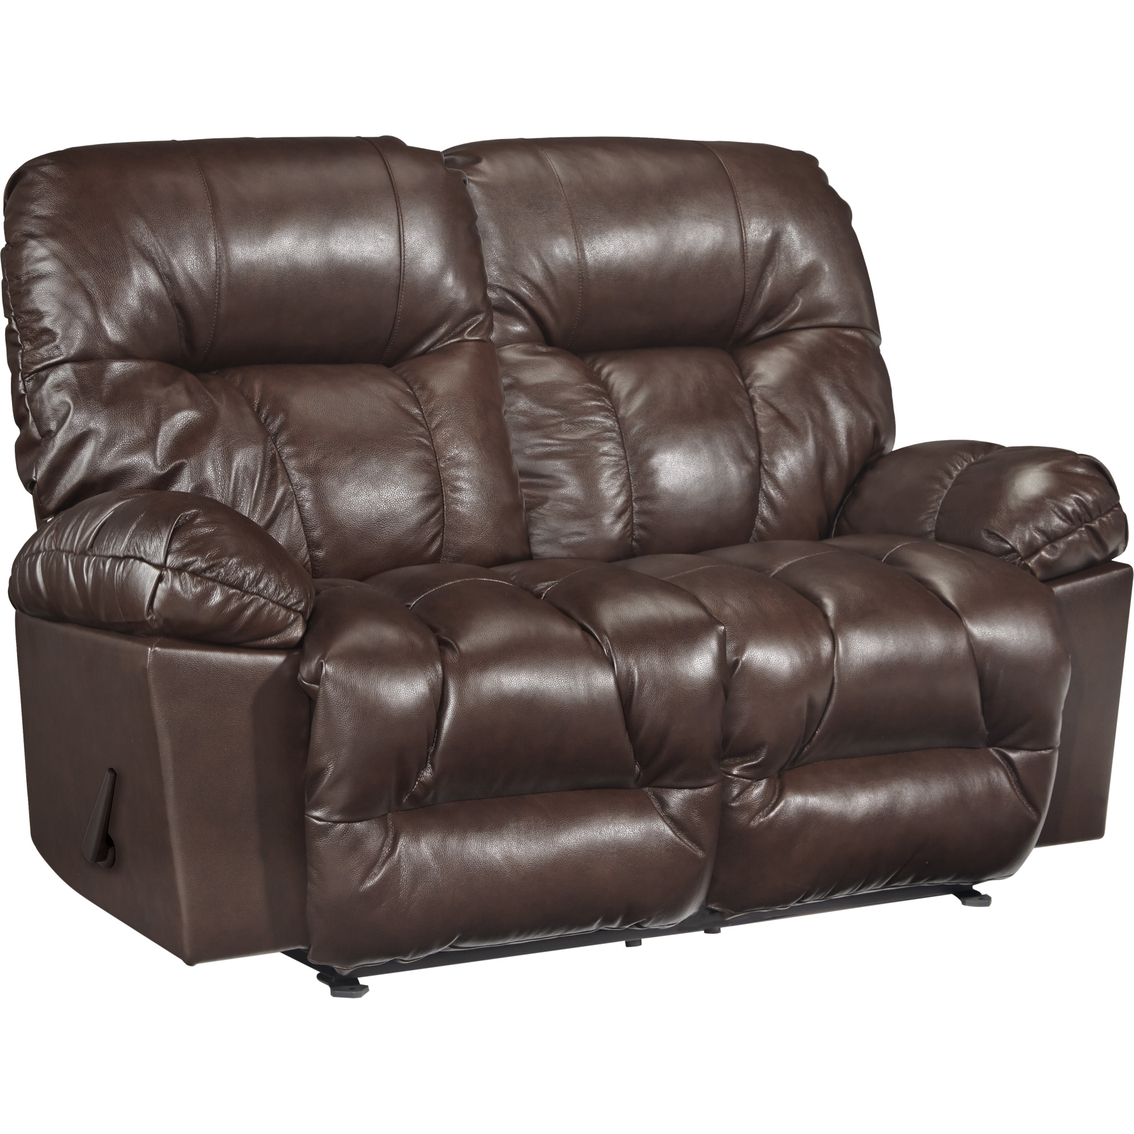 Best Home Furnishings Retreat Leather Reclining Loveseat | Sofas